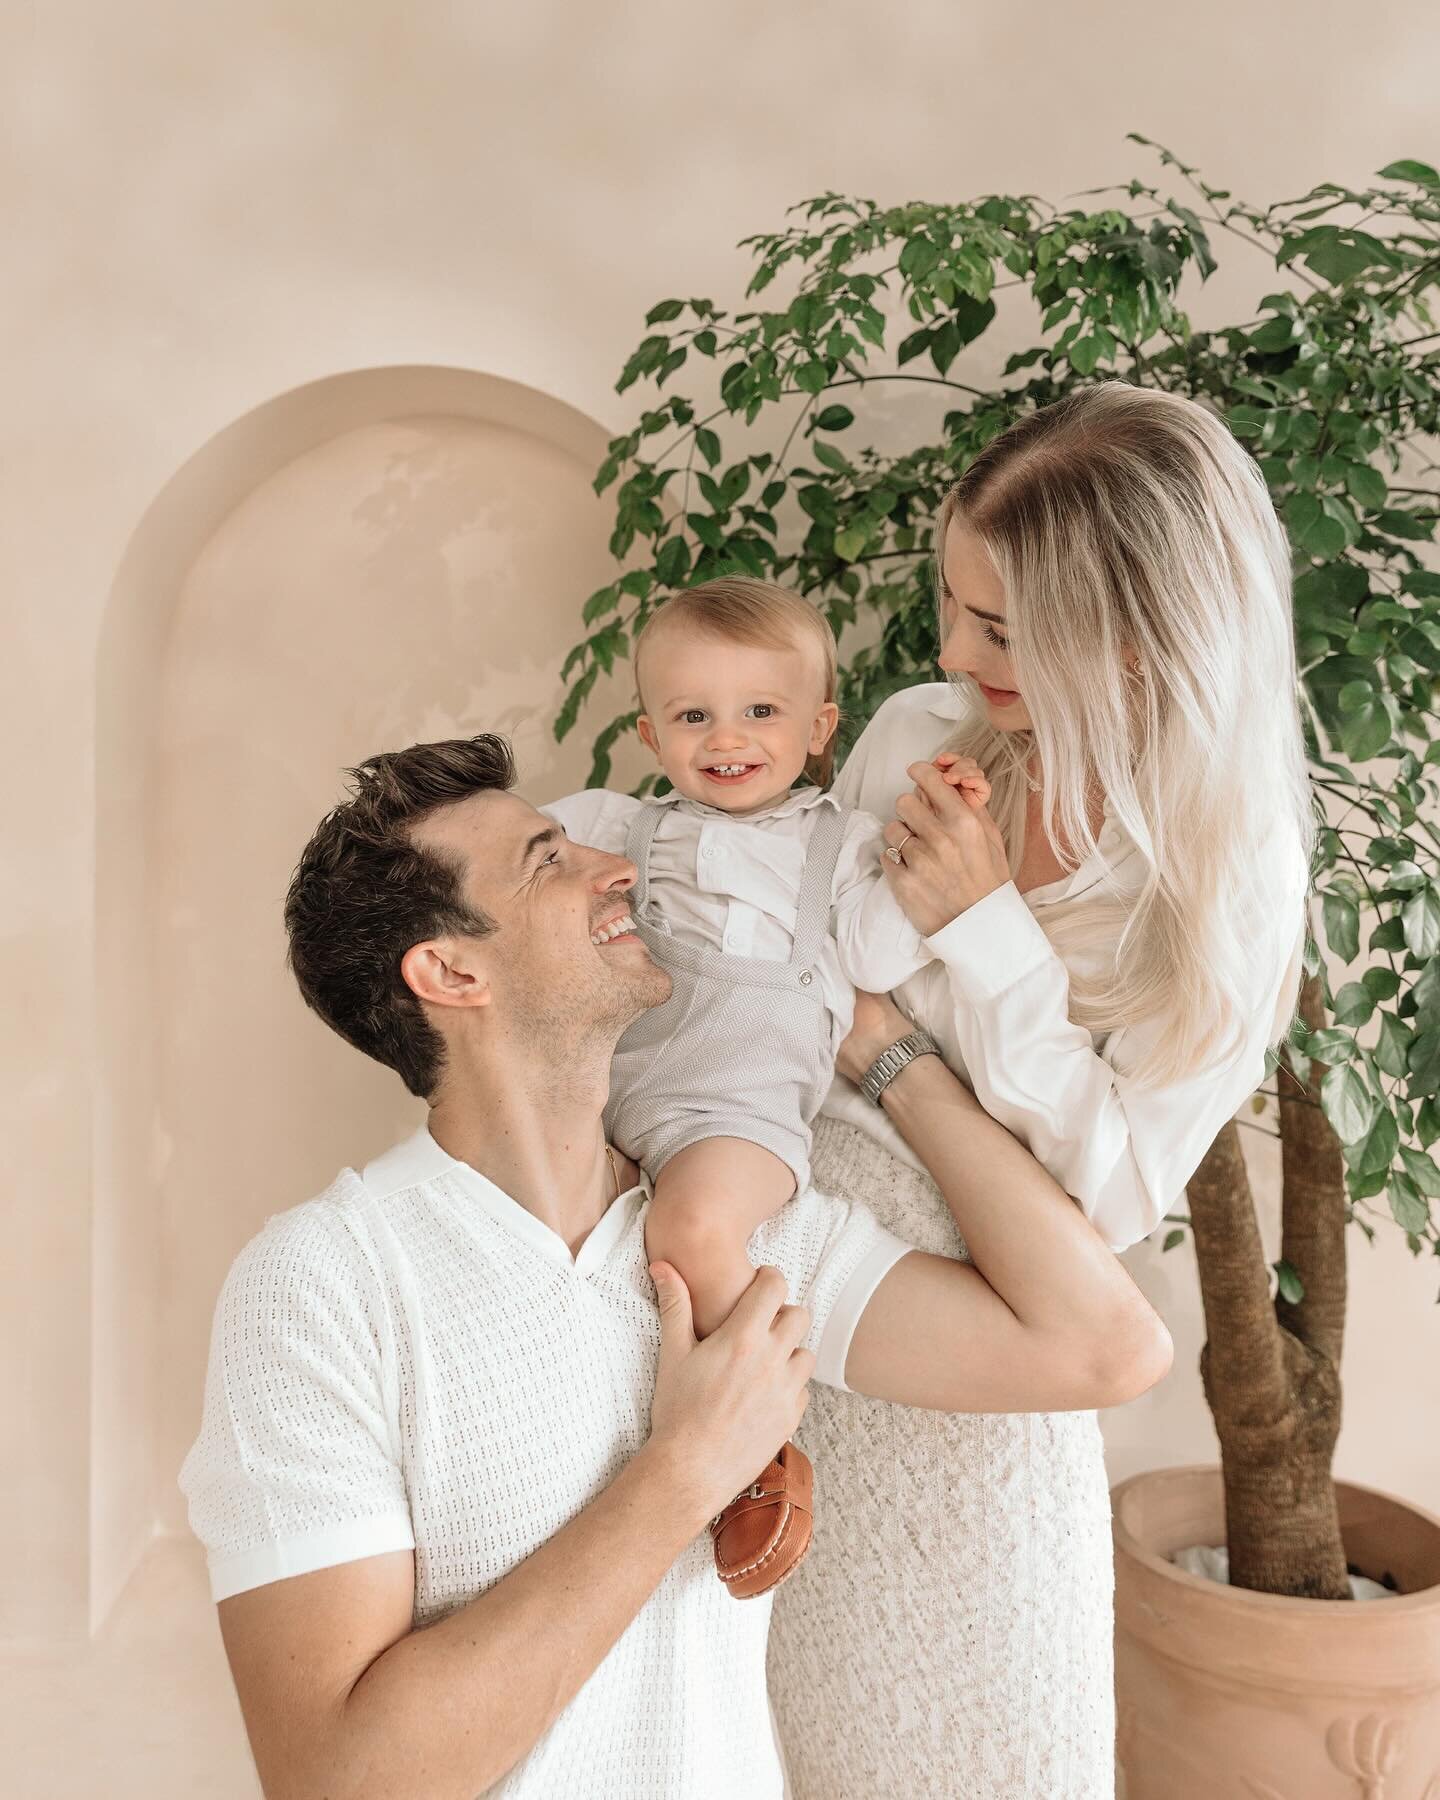 The Millington family @monicamillington returns to The Love Studios, this time to explore the wonders of #thelovestudiosComo! Amidst Cruz&rsquo;s first-ever selfie, tender kisses and gentle glances, their unwavering love for each other shines through